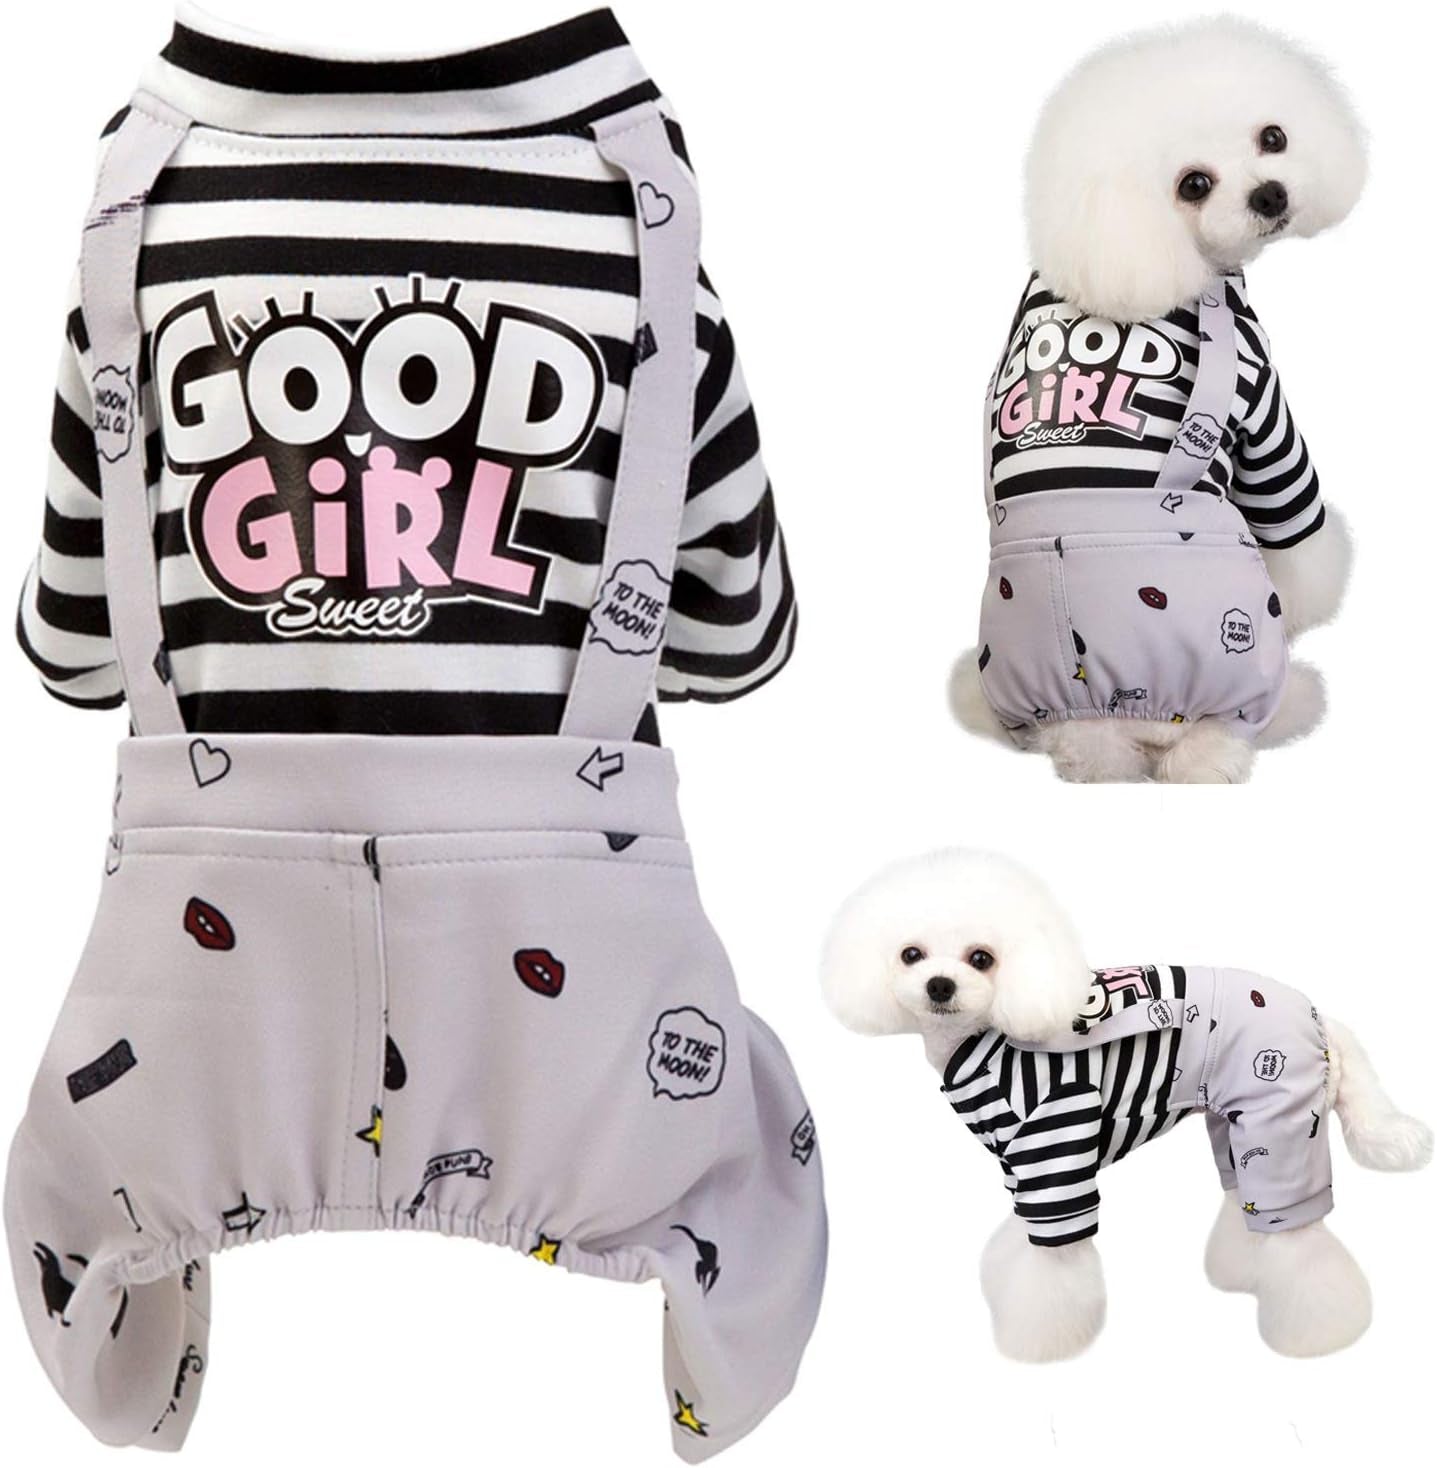 Brocarp Dog Clothes Striped Onesie Puppy Shirt, Cute Dog Pajamas Bodysuit Coat Jumpsuit Overalls Soft Comfort Pjs Apparel Costume, Dog Outfit for Small Medium Large Dogs Cats Kitten Boy Girl Animals & Pet Supplies > Pet Supplies > Dog Supplies > Dog Apparel Brocarp Grey XX-Large 